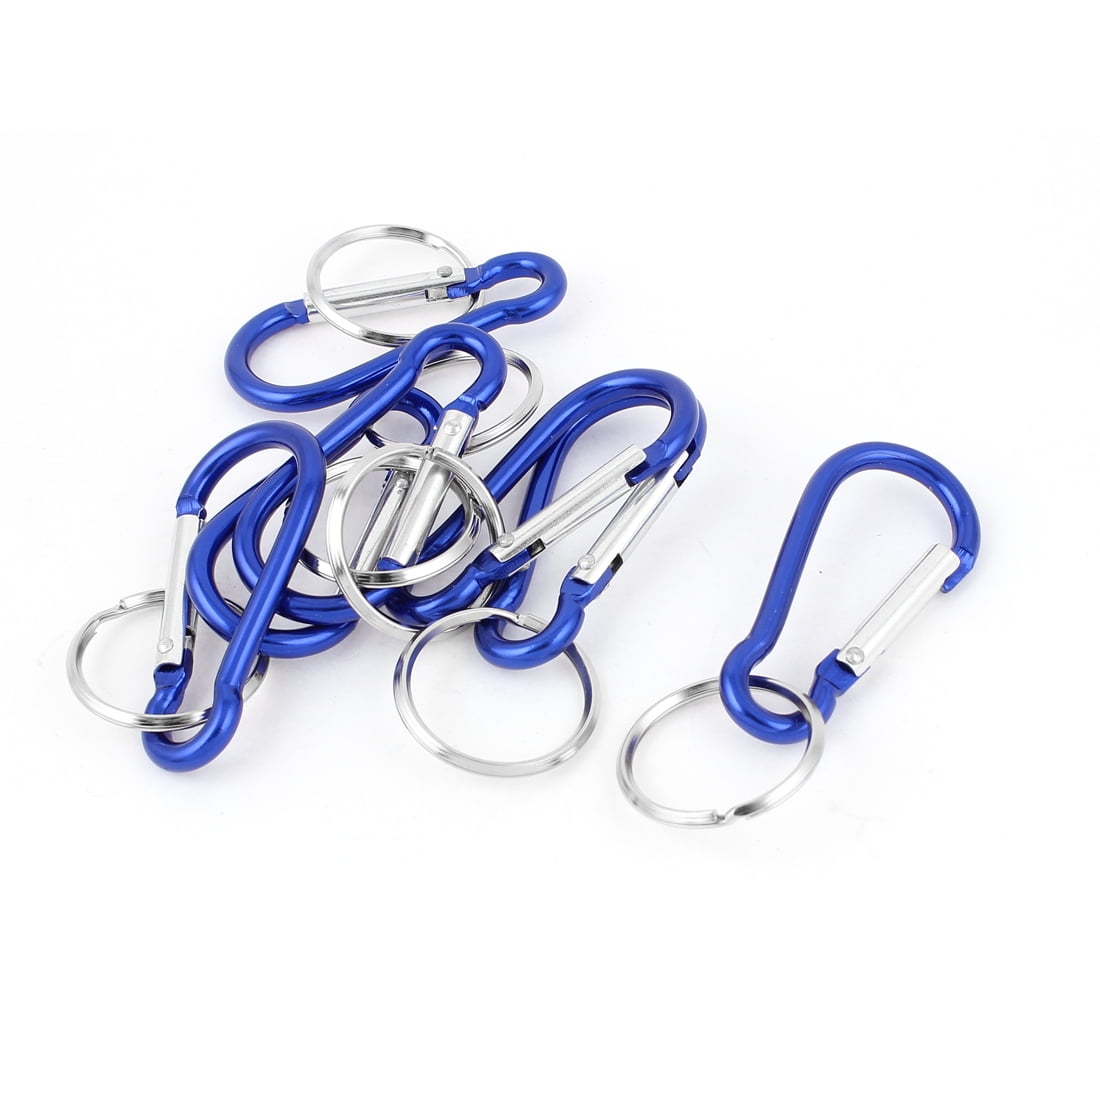 30Pcs Plastic Spring Clip Hooks Plastic Keychain Buckle Carabiner Clasp Camping 